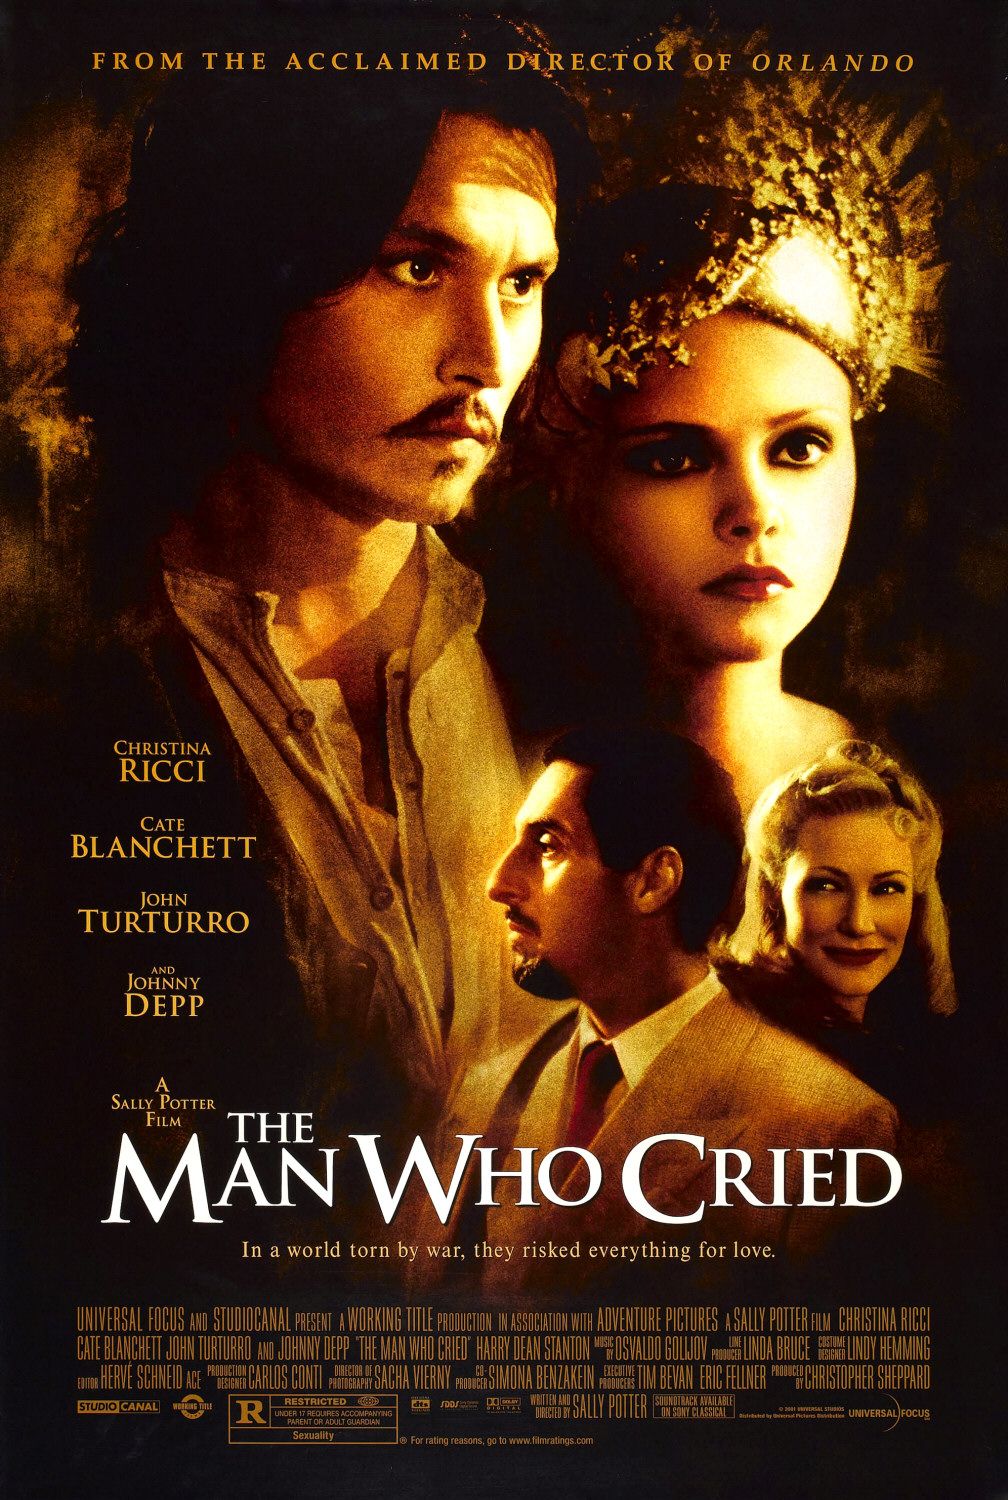 The Man Who Cried movie